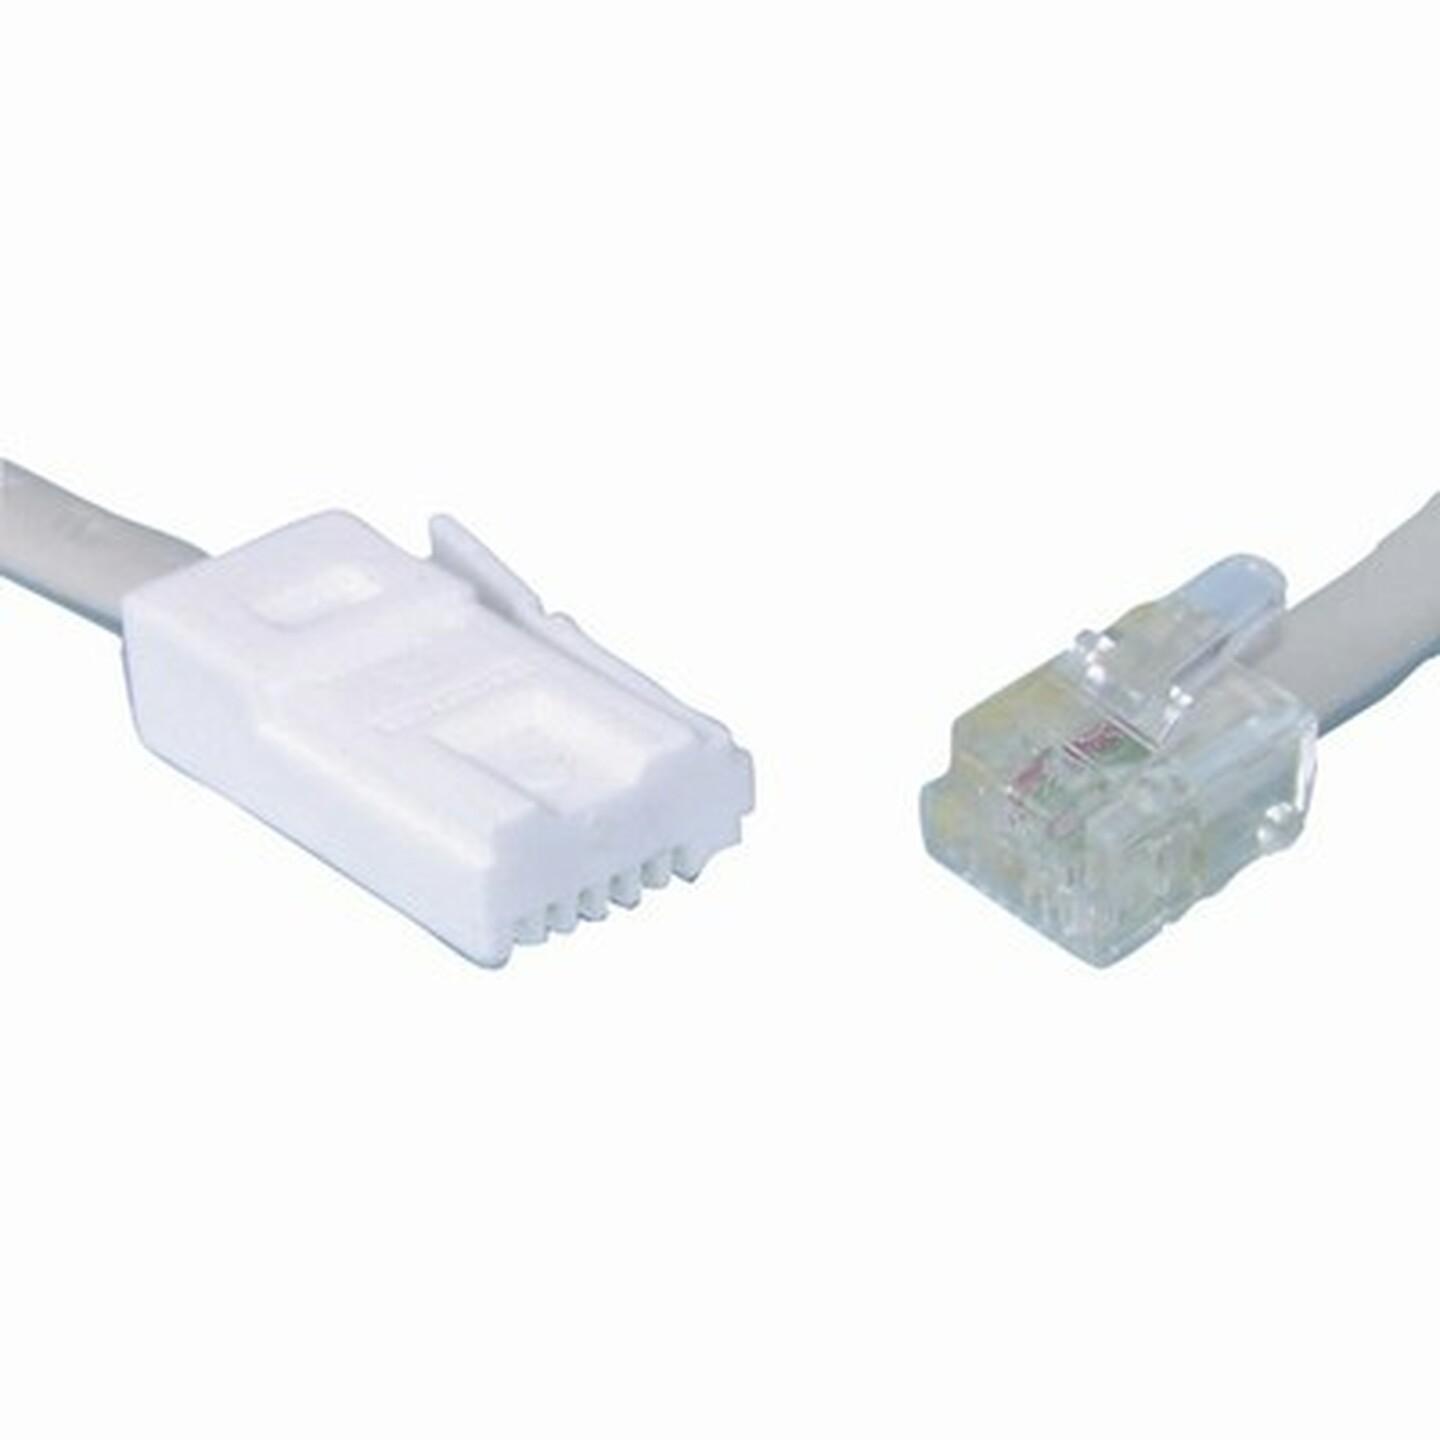 NZ to RJ11 3m Extension Cable